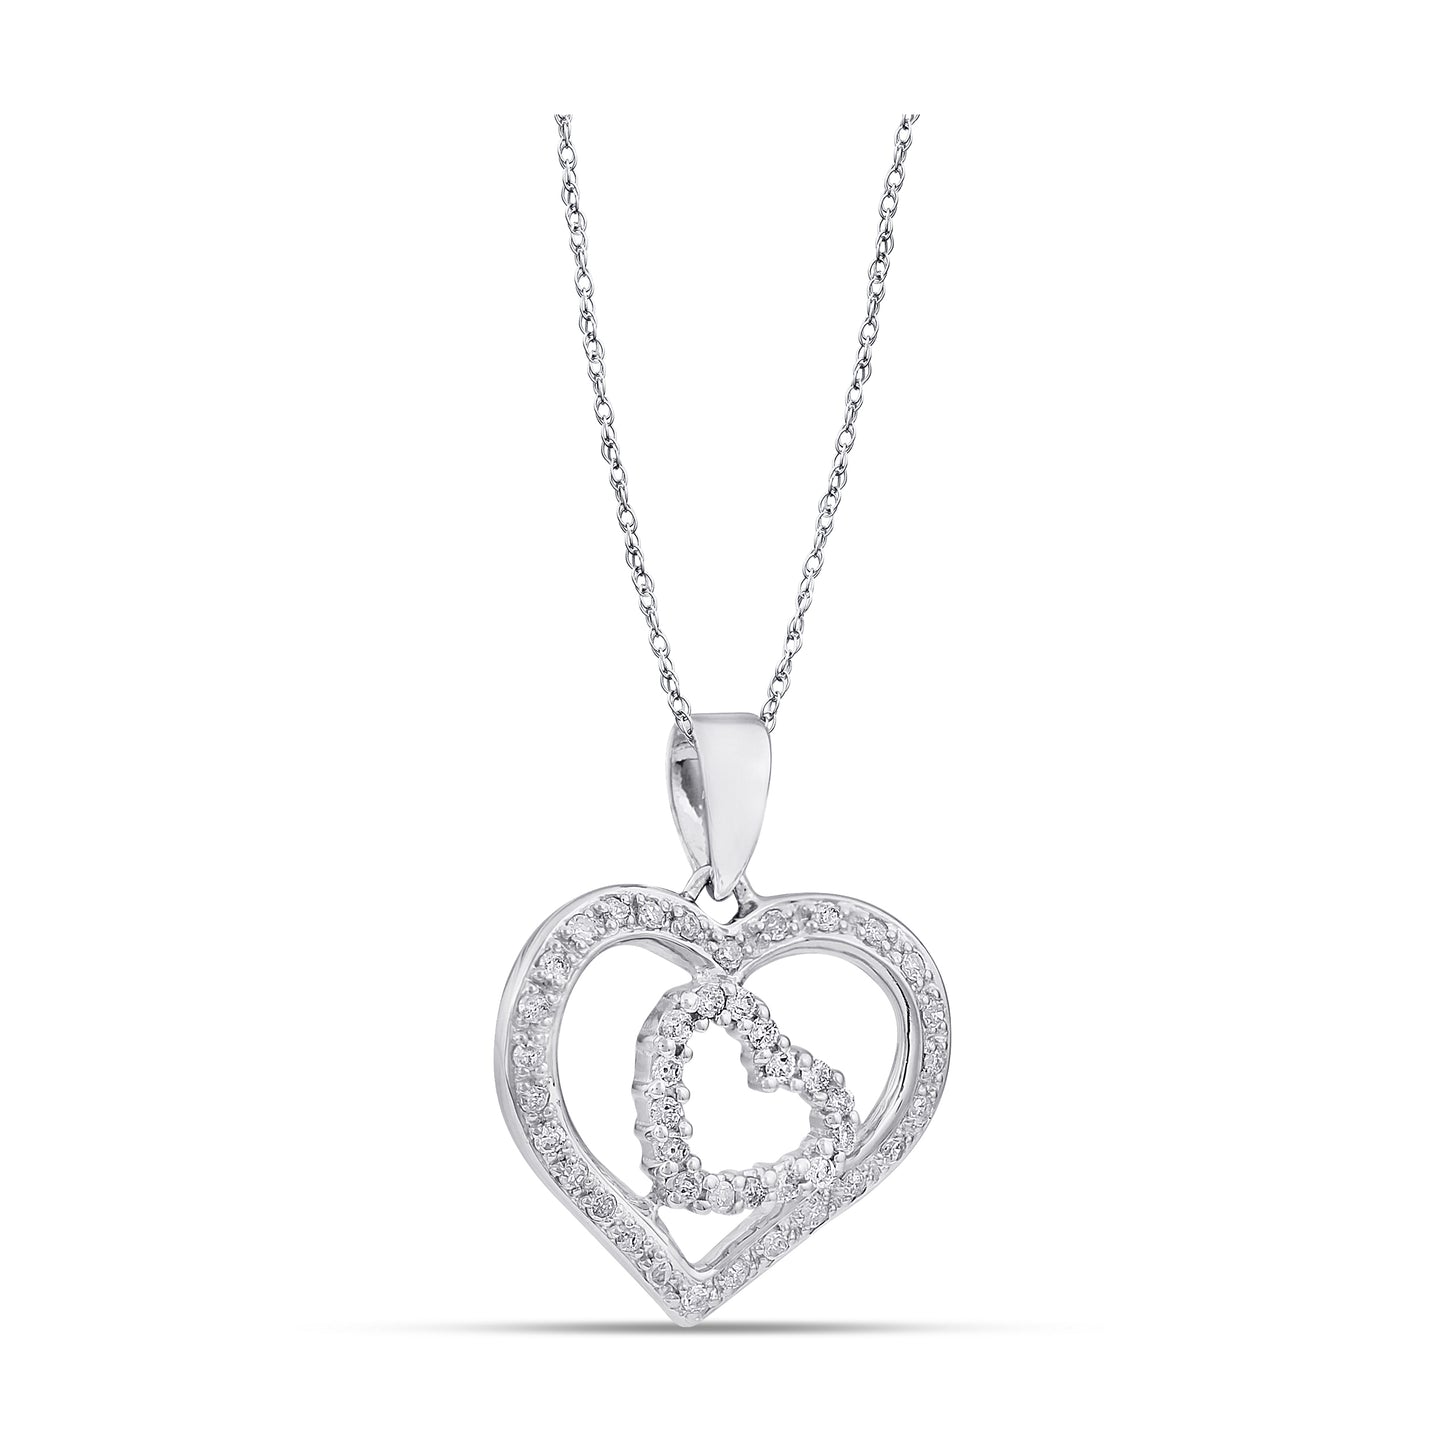 Belantina 1/5 Carat Diamond Double Heart Pendant Necklace for Women in 14k White and Yellow Gold on 18 Inch Chain (H-I, I1-I2, cttw) Spring Ring